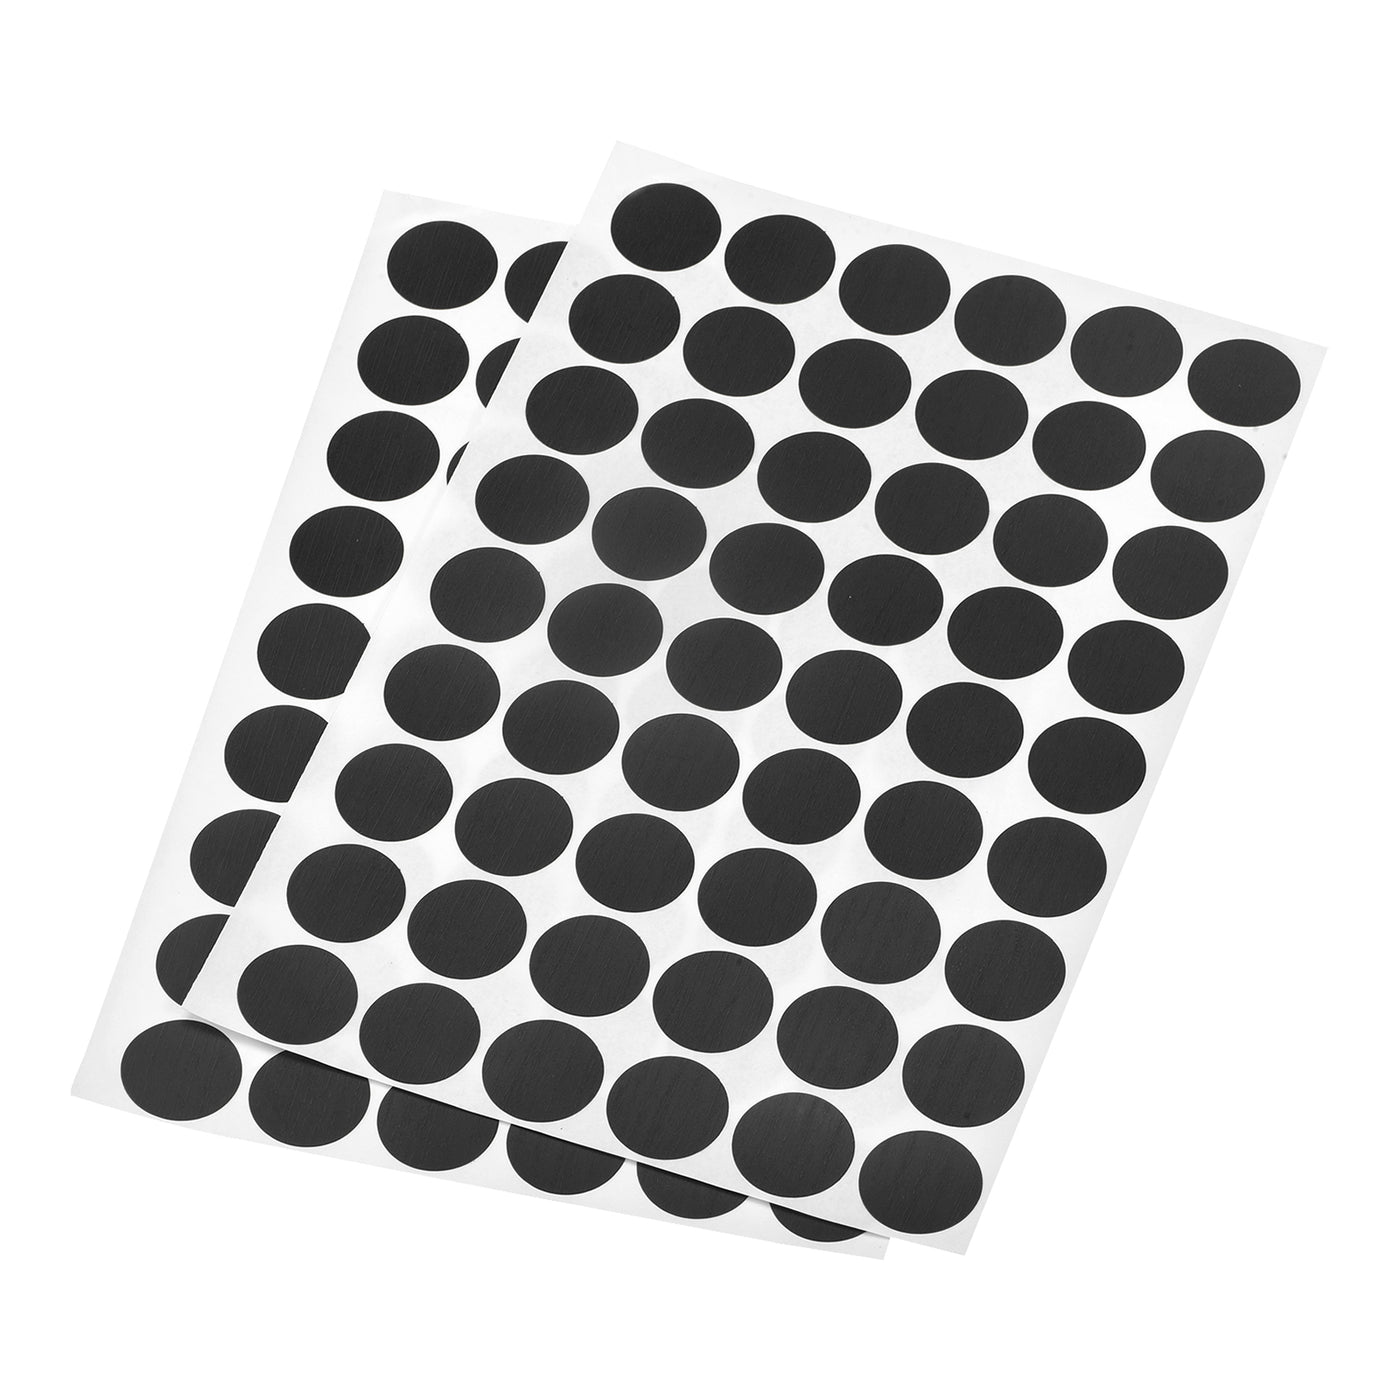 uxcell Uxcell Screw Hole Cover Stickers, 21mm Dia PVC Self Adhesive Covers Caps for Wood Furniture Cabinet Shelf Wardrobe, Black 4 Sheet/216pcs